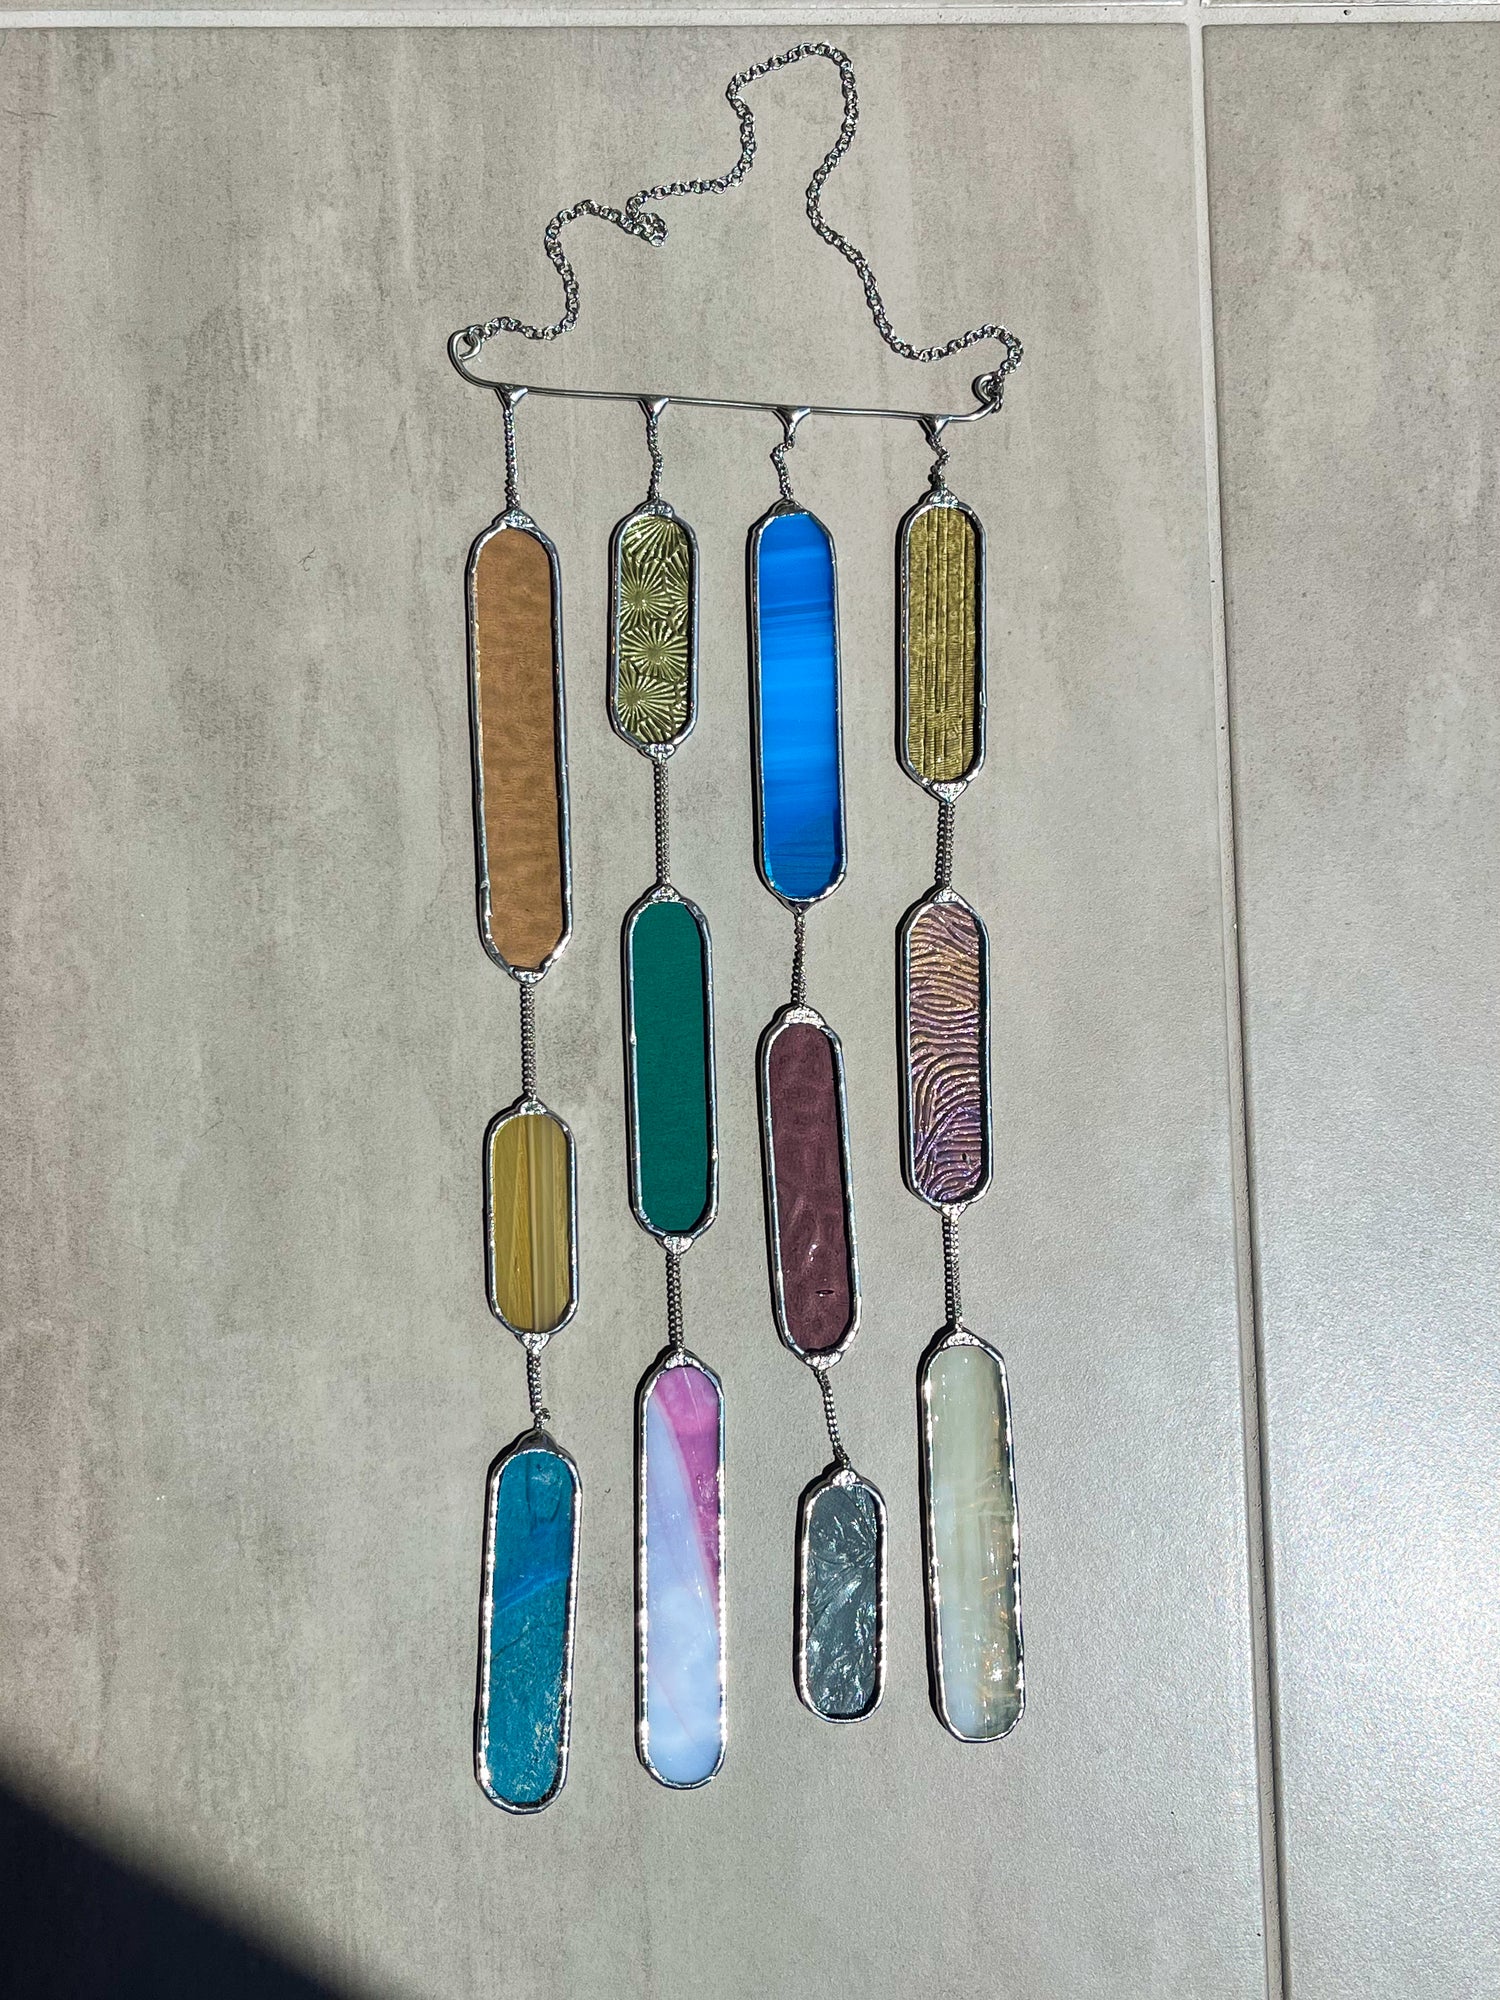 Handmade stained glass pendant with three elements attached by a silver chain. You can hang this panel in a window, on the wall as decor or even an outside patio. Custom made for Thread Spun by Culotta Creations.